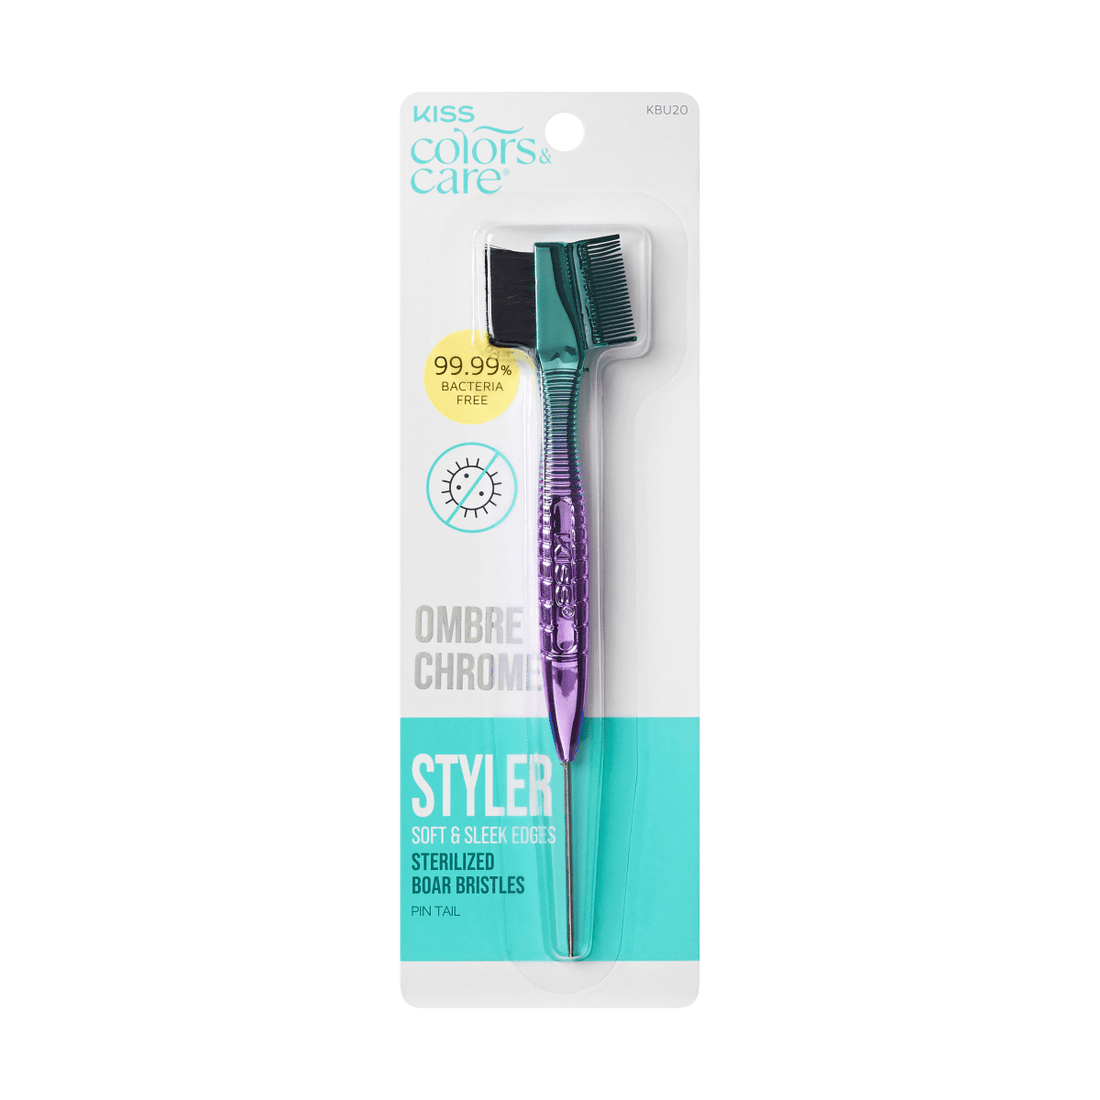 KISS Colors &amp; Care Ombre Chrome 3-in-1 Edge Brush